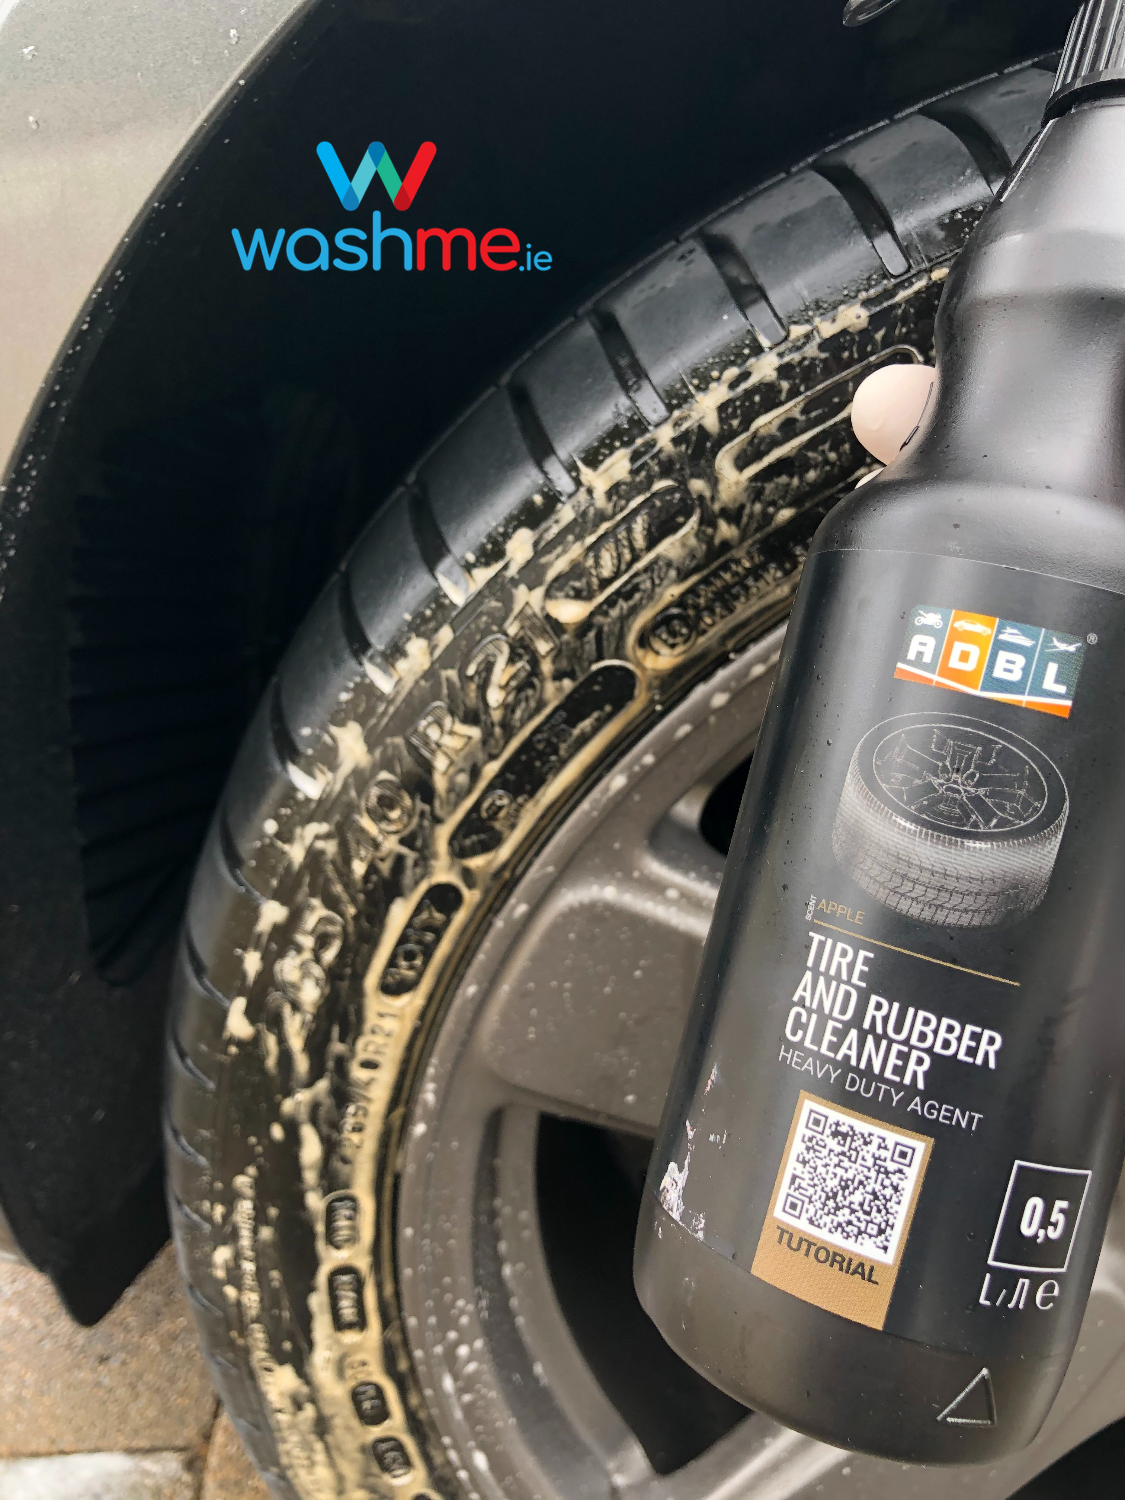 ADBL Tyre and rubber cleaner. clean tyres or tires. black spray bottle. best tire and rubber cleaner 5 litre. ADBL Cork Ireland